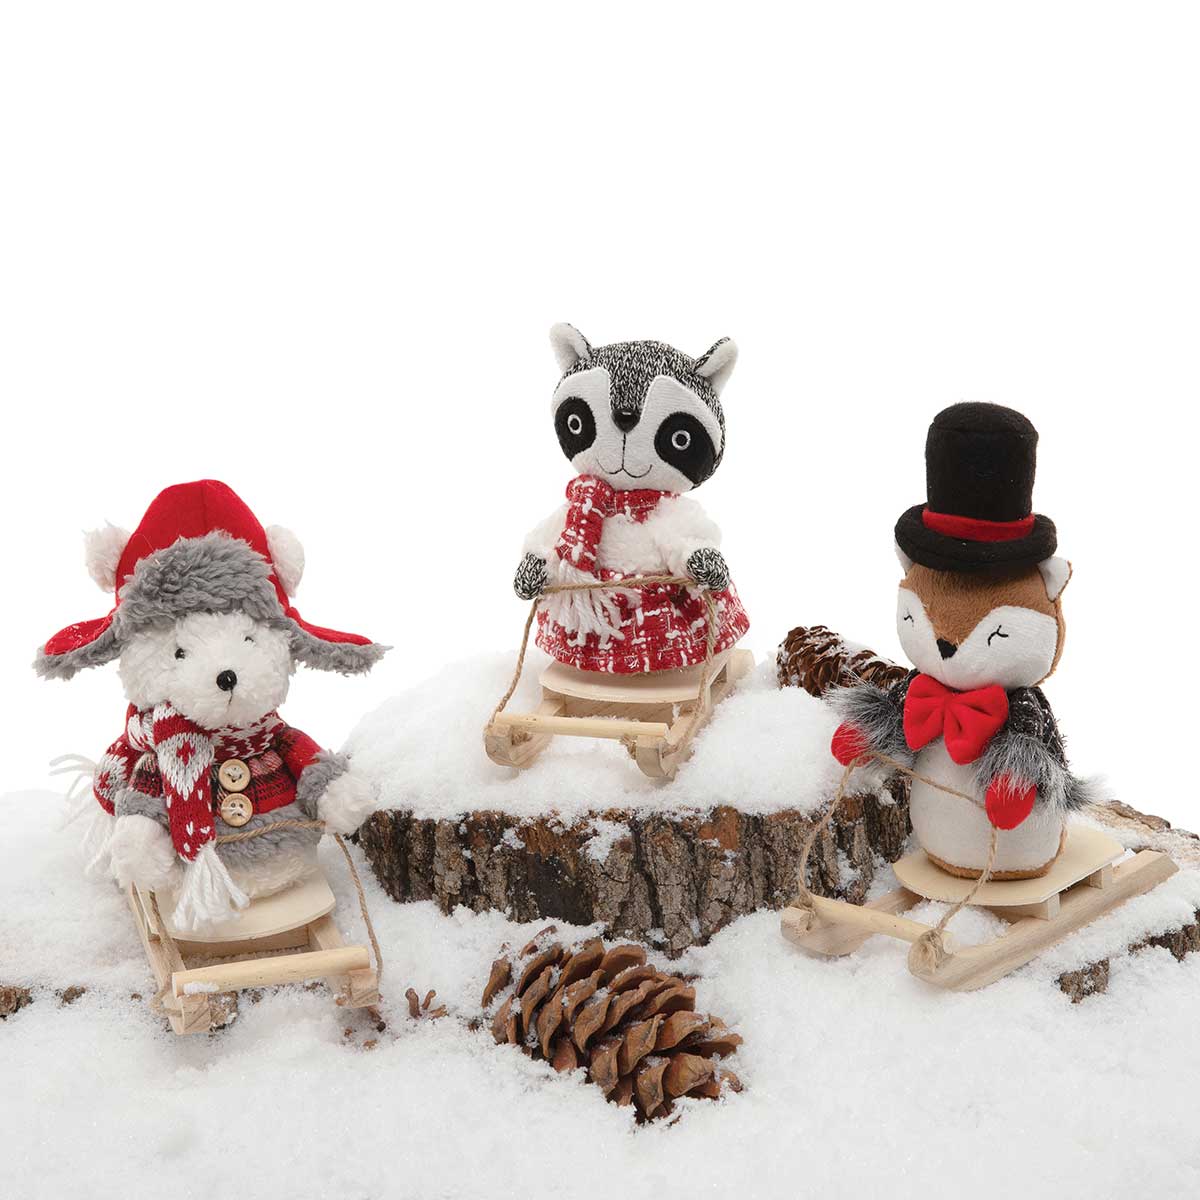 RACCOON WINTER ON SLED 3IN X 7IN X 6IN GY/RE/WH WITH SWEATER